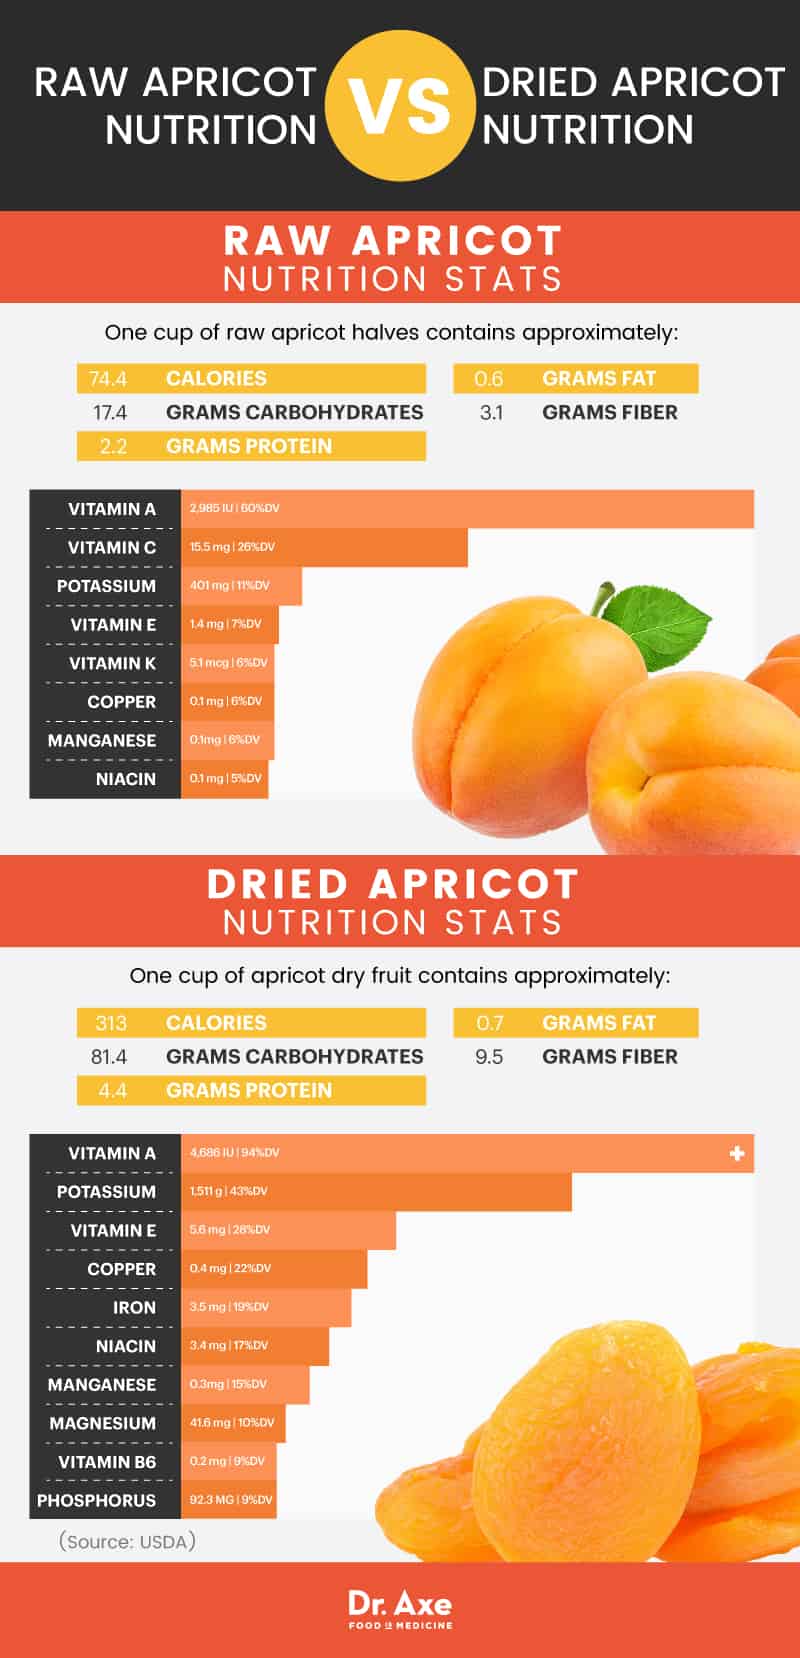 Apricot nutrition - Dr. Axe